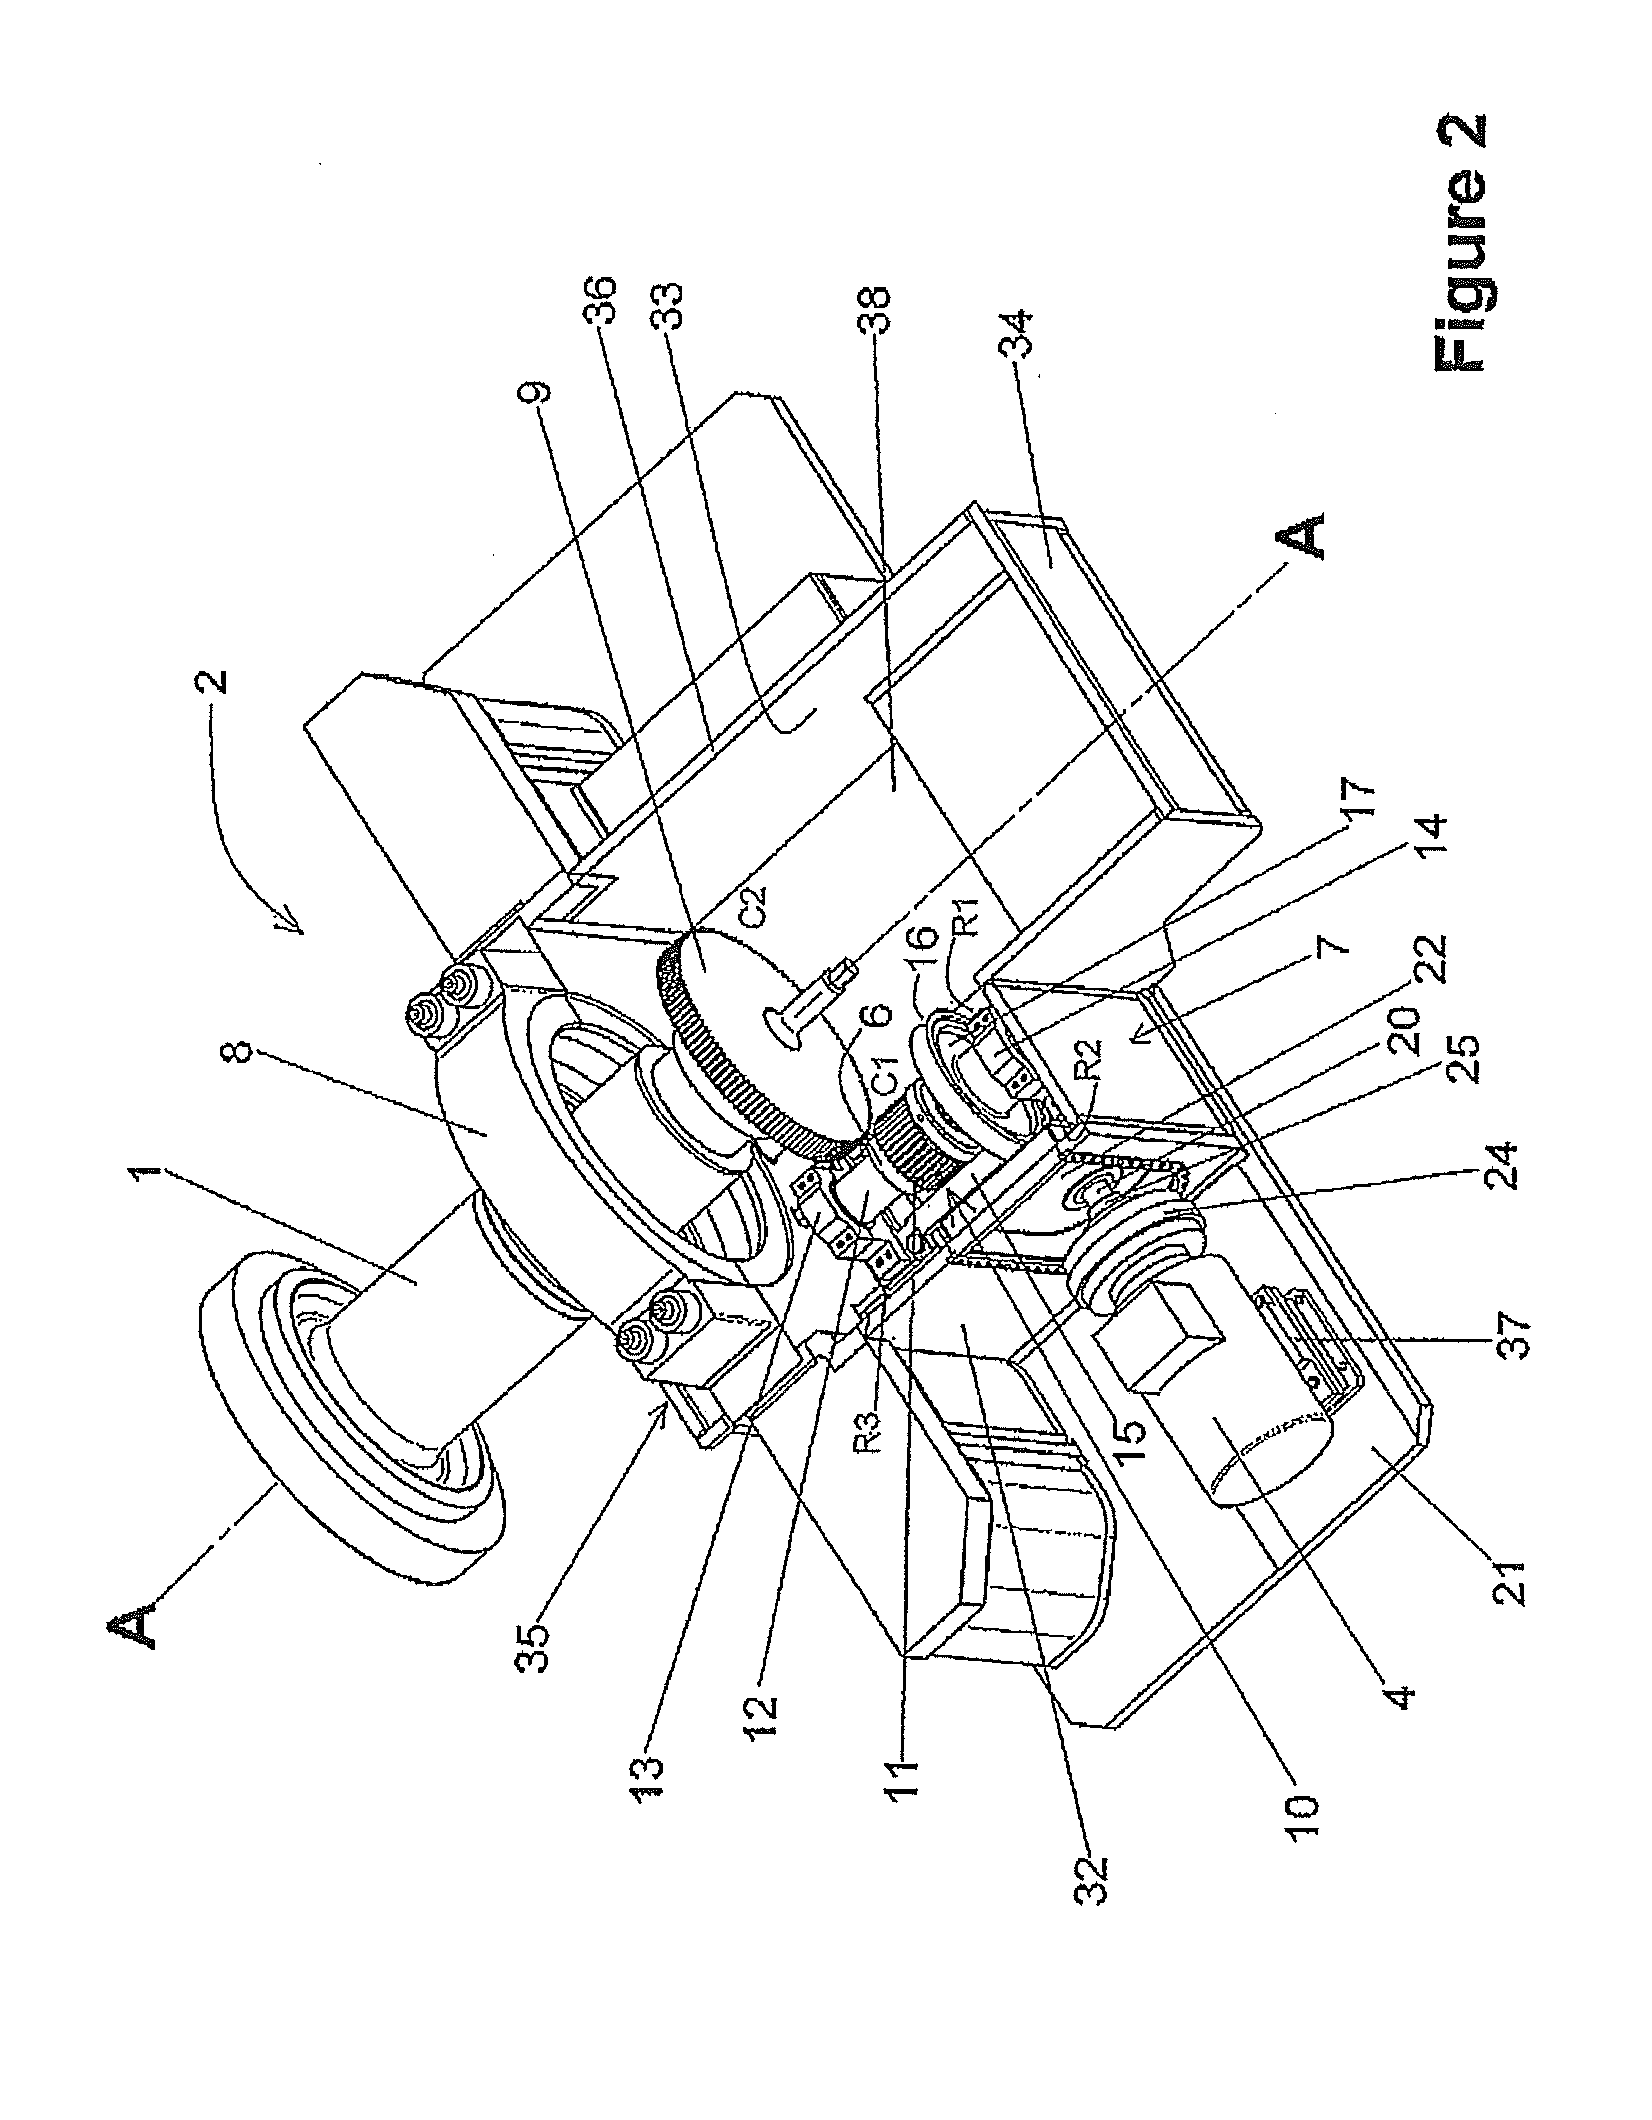 Barring gear assembly for driving in rotation a shaft of a turbo-alternator group